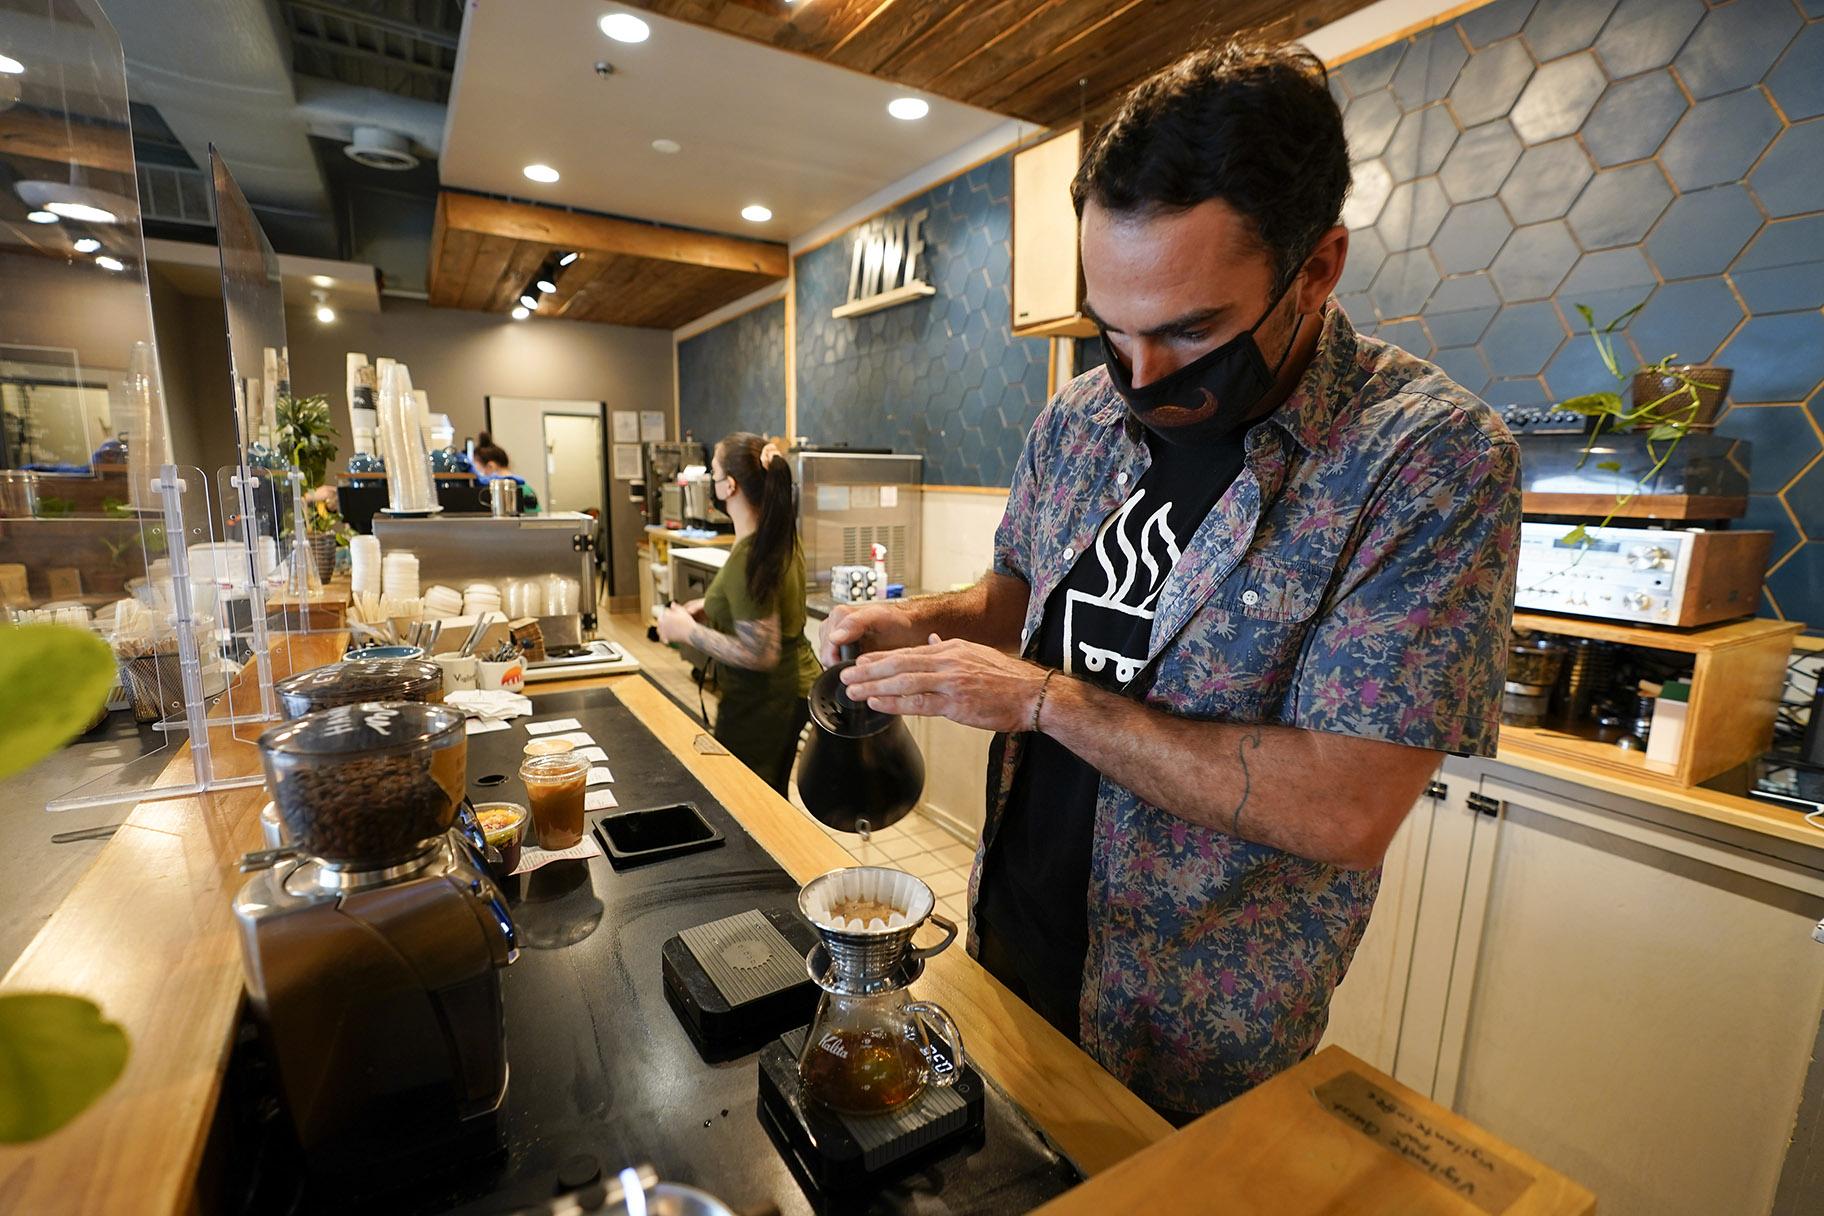 Chris Vigilante makes a dripped coffee for a customer at one of his coffee shops, Wednesday, Sept. 1, 2021, in College Park, Md. (AP Photo / Julio Cortez)